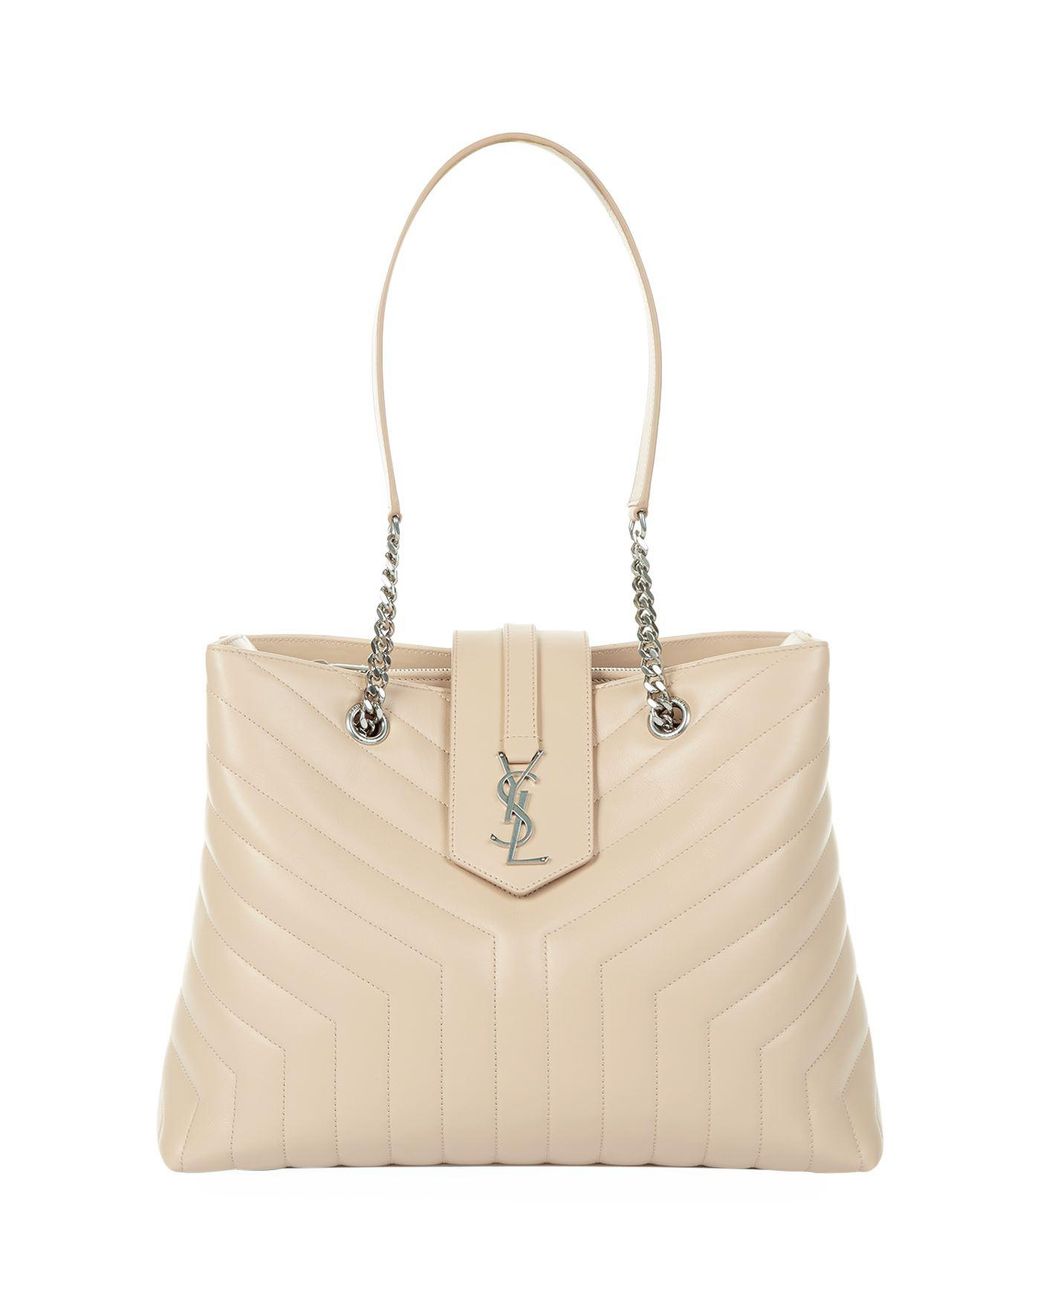 Saint Laurent Large Loulou Shopping Bag in Natural | Lyst